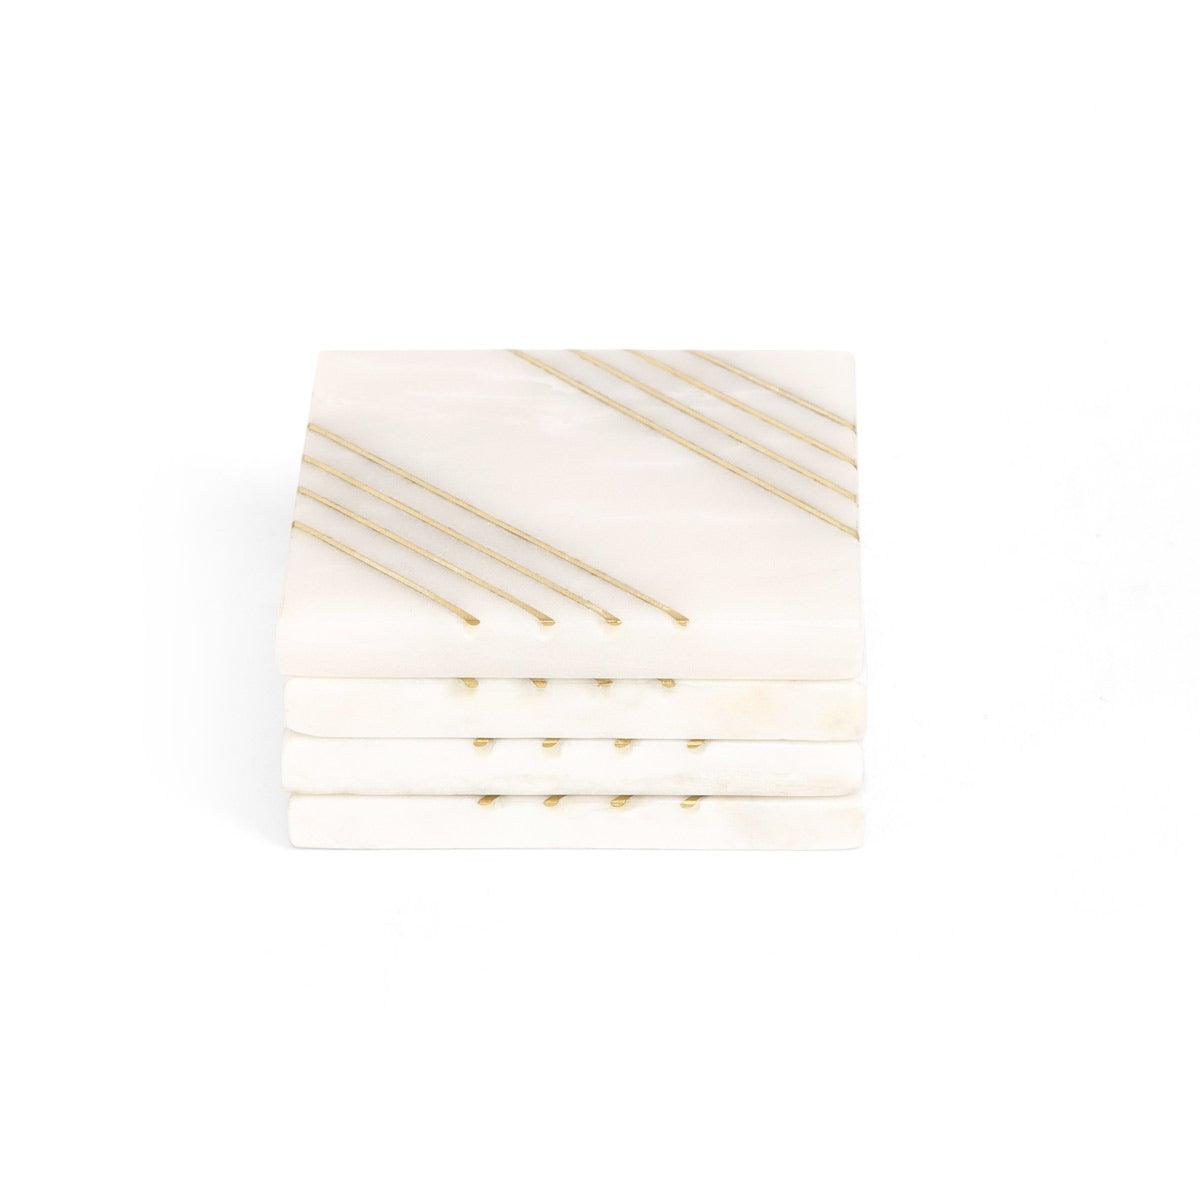 Sulivian Square Coaster Set of 4 with brass stripes